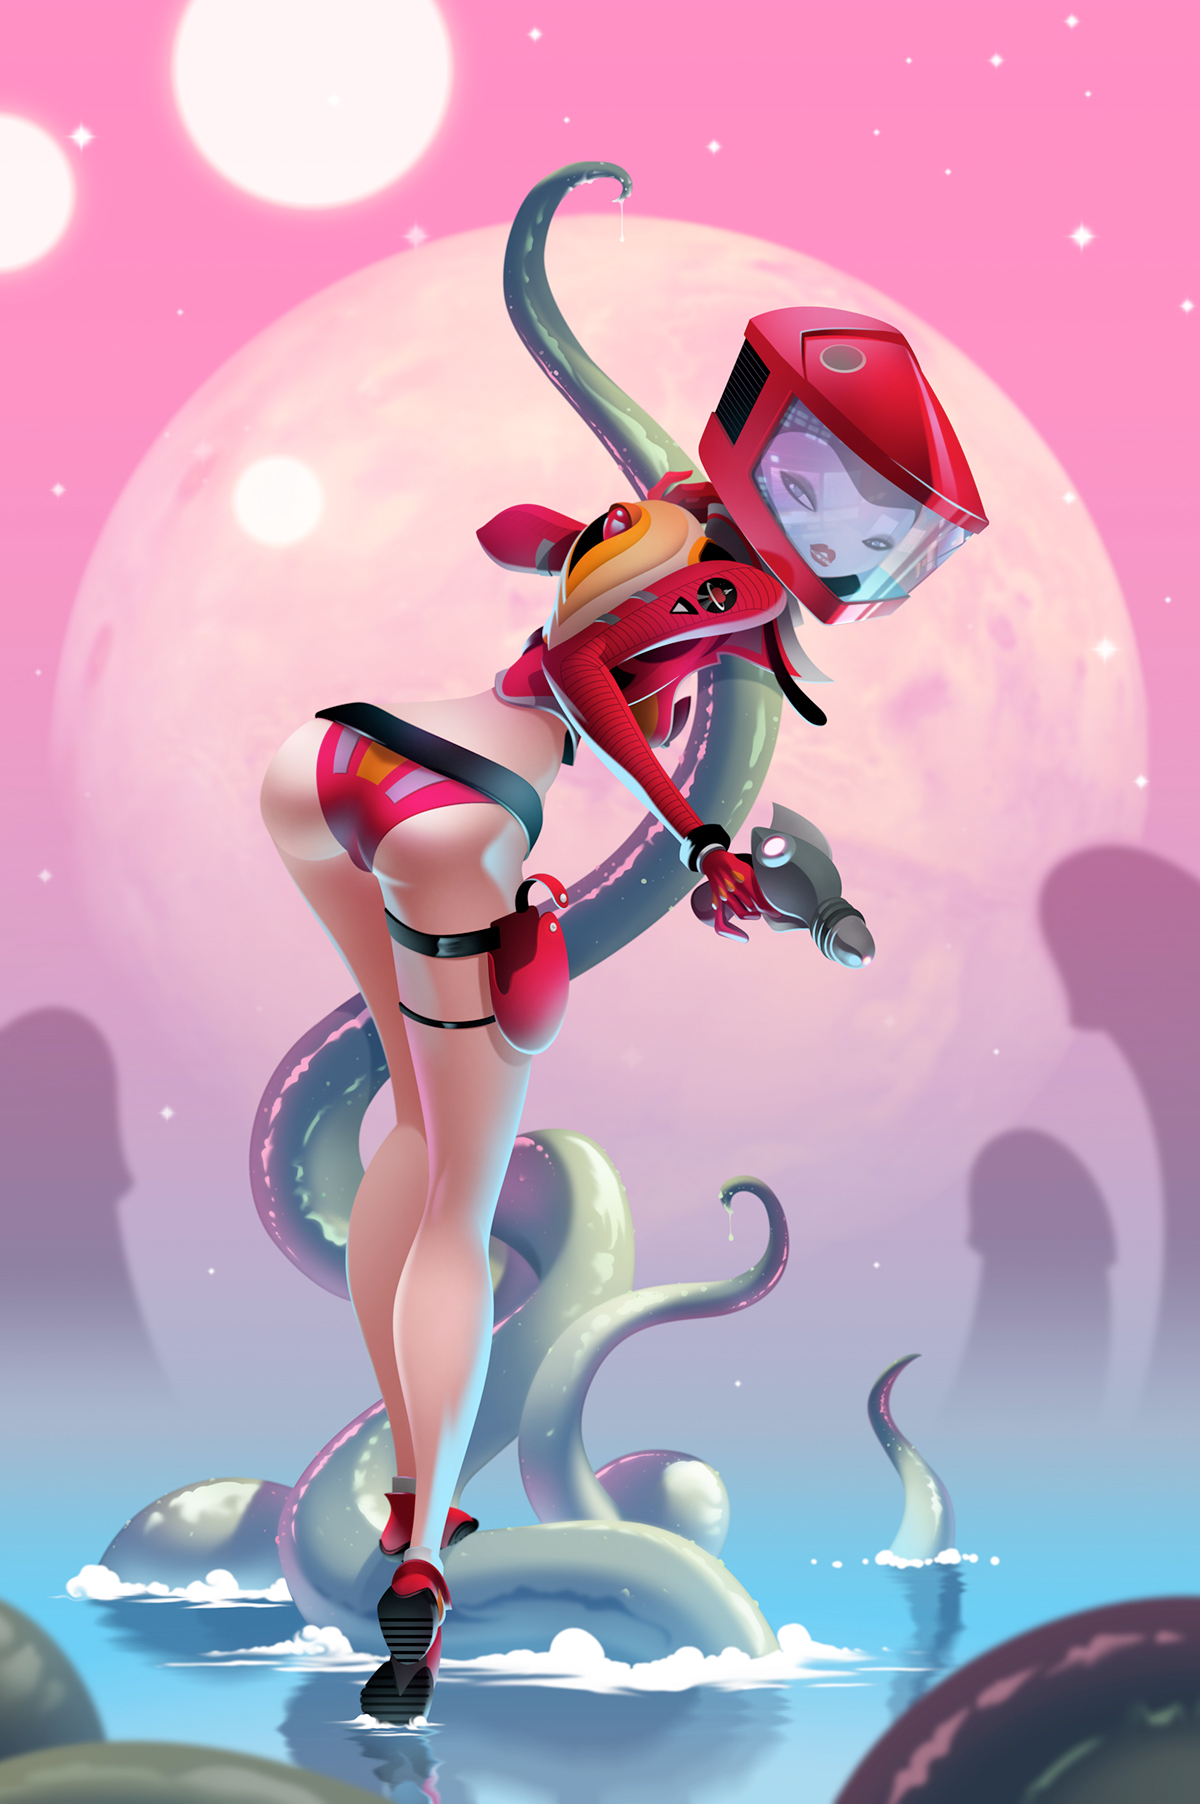 Sci Fi space odyssey girl tentacles